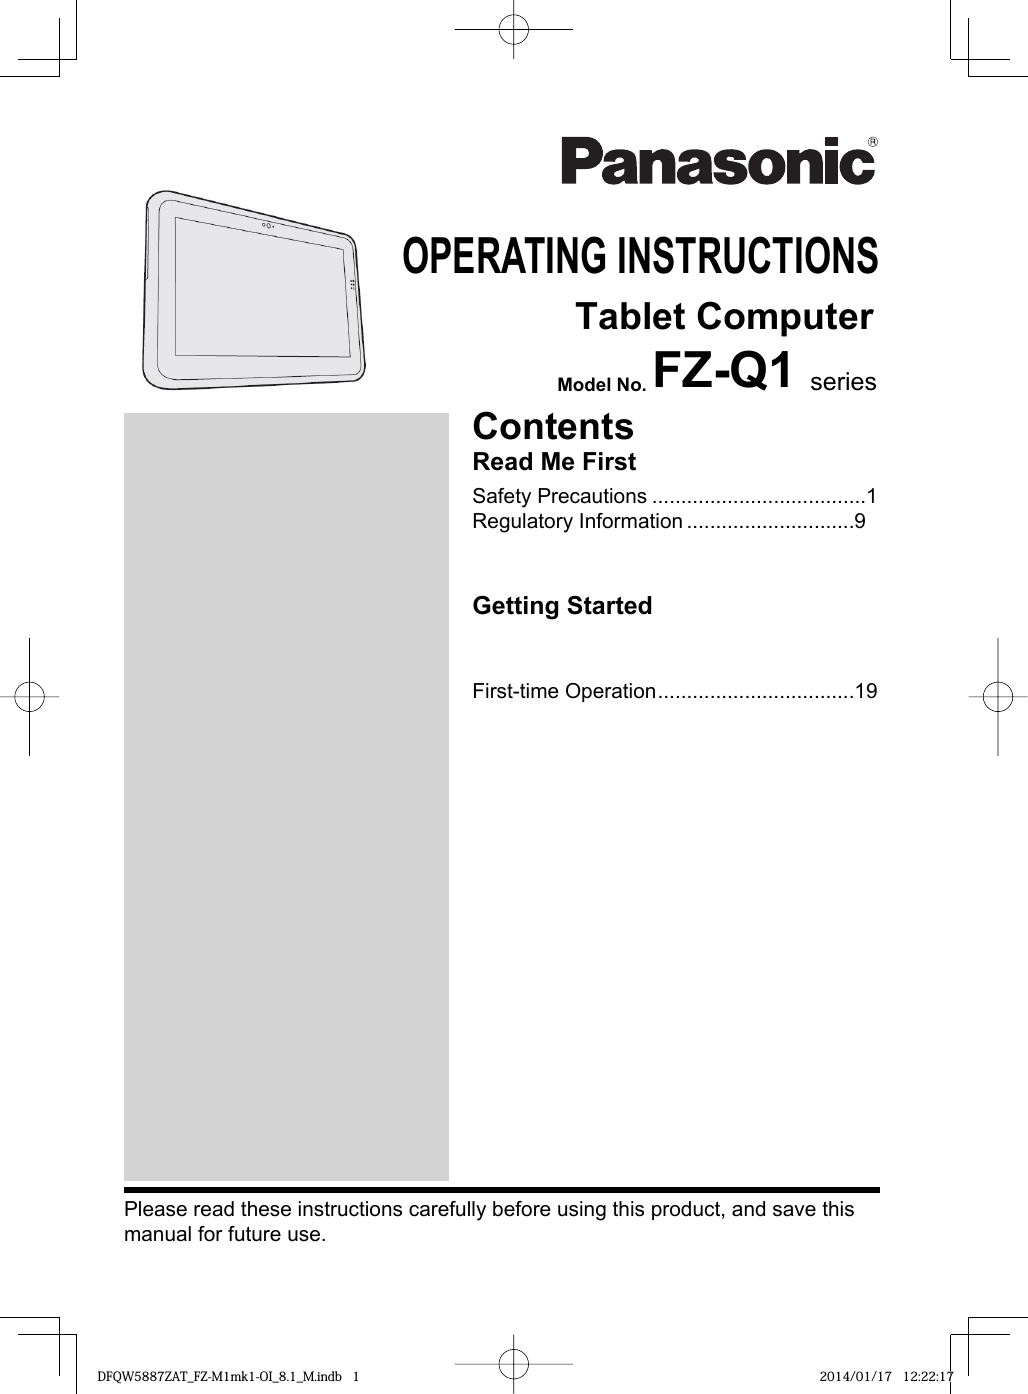 OPERATING INSTRUCTIONS    Tablet ComputerModel No. FZ-Q1 seriesPlease read these instructions carefully before using this product, and save this manual for future use.ContentsRead Me FirstSafety Precautions .....................................1Regulatory Information .............................9Getting StartedFirst-time Operation ..................................19DFQW5887ZAT_FZ-M1mk1-OI_8.1_M.indb  1DFQW5887ZAT_FZ-M1mk1-OI_8.1_M.indb 1 2014/01/17  12:22:172014/01/17 12:22:17